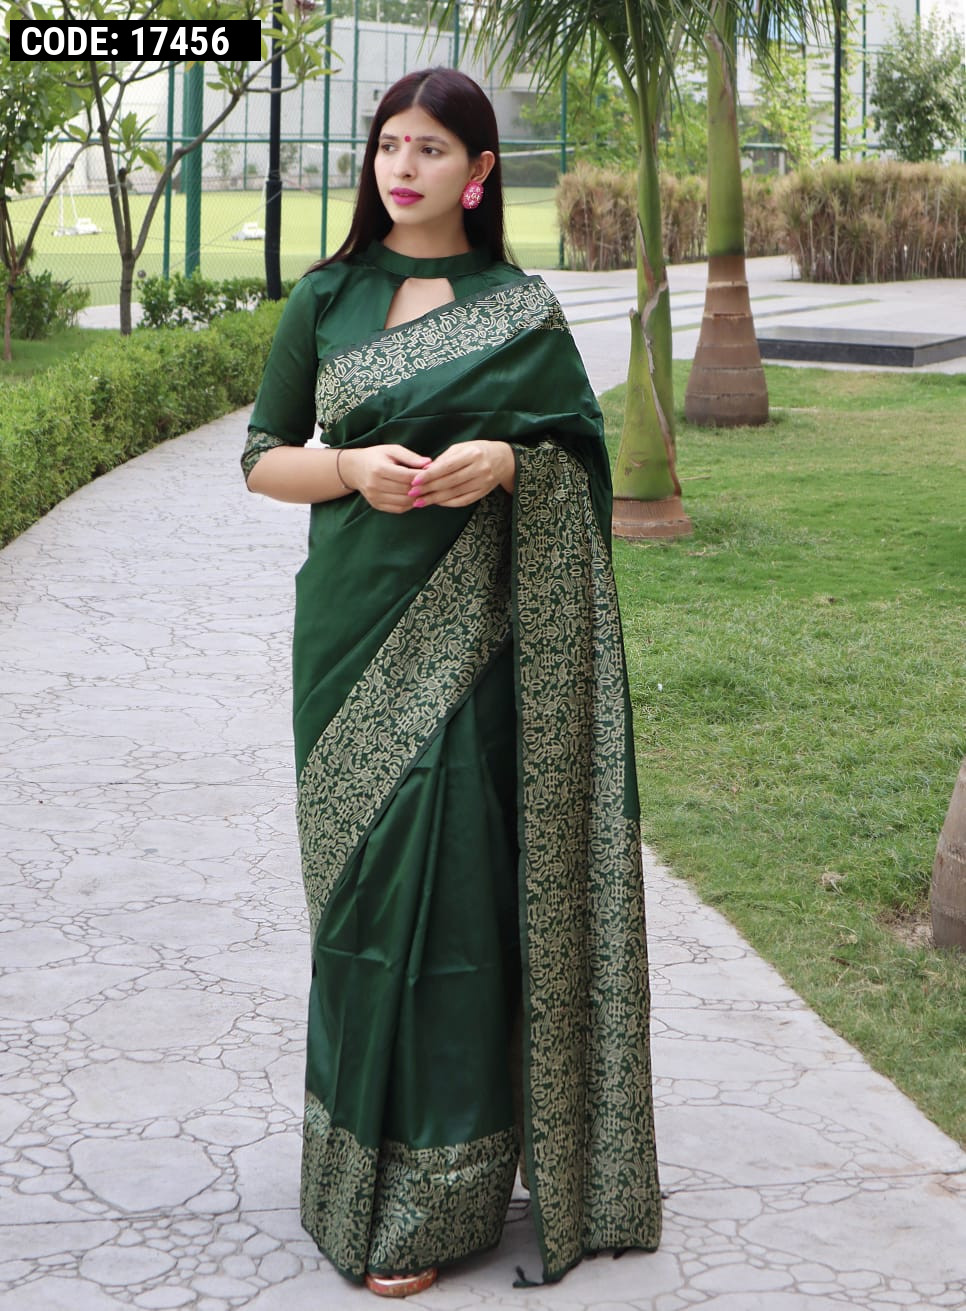 Buy AngaShobha Green Cotton Blend Self Design Saree With Running Blouse  Piece at Amazon.in